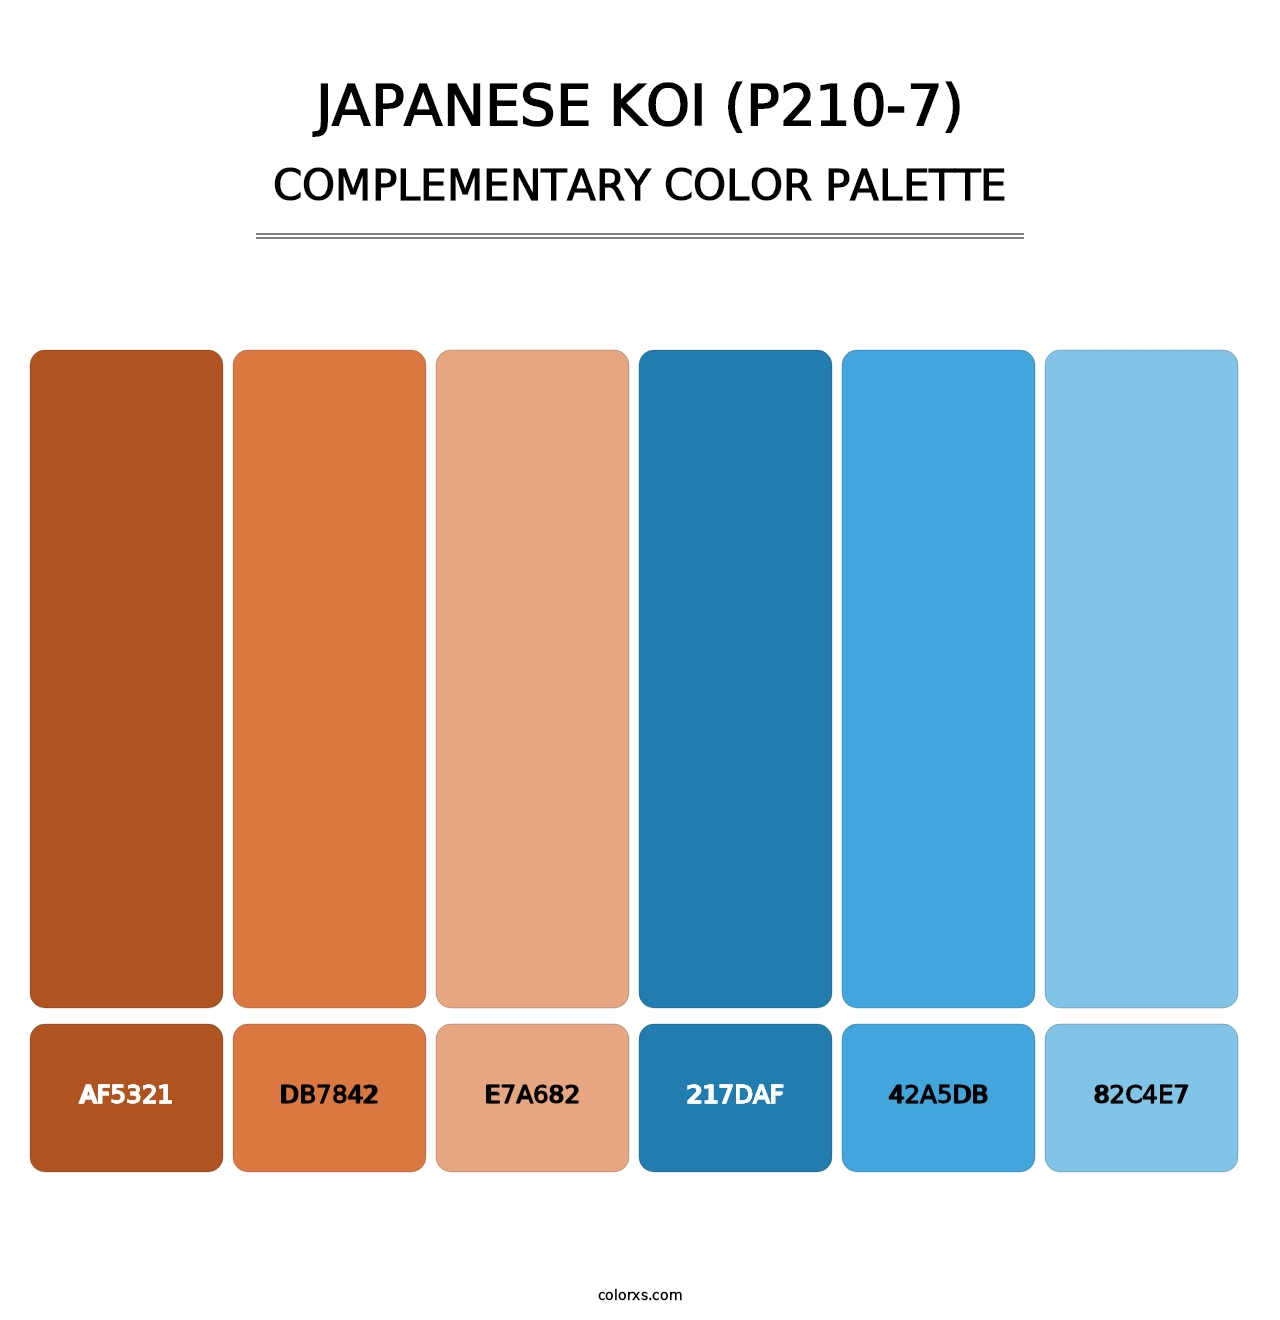 Japanese Koi (P210-7) - Complementary Color Palette